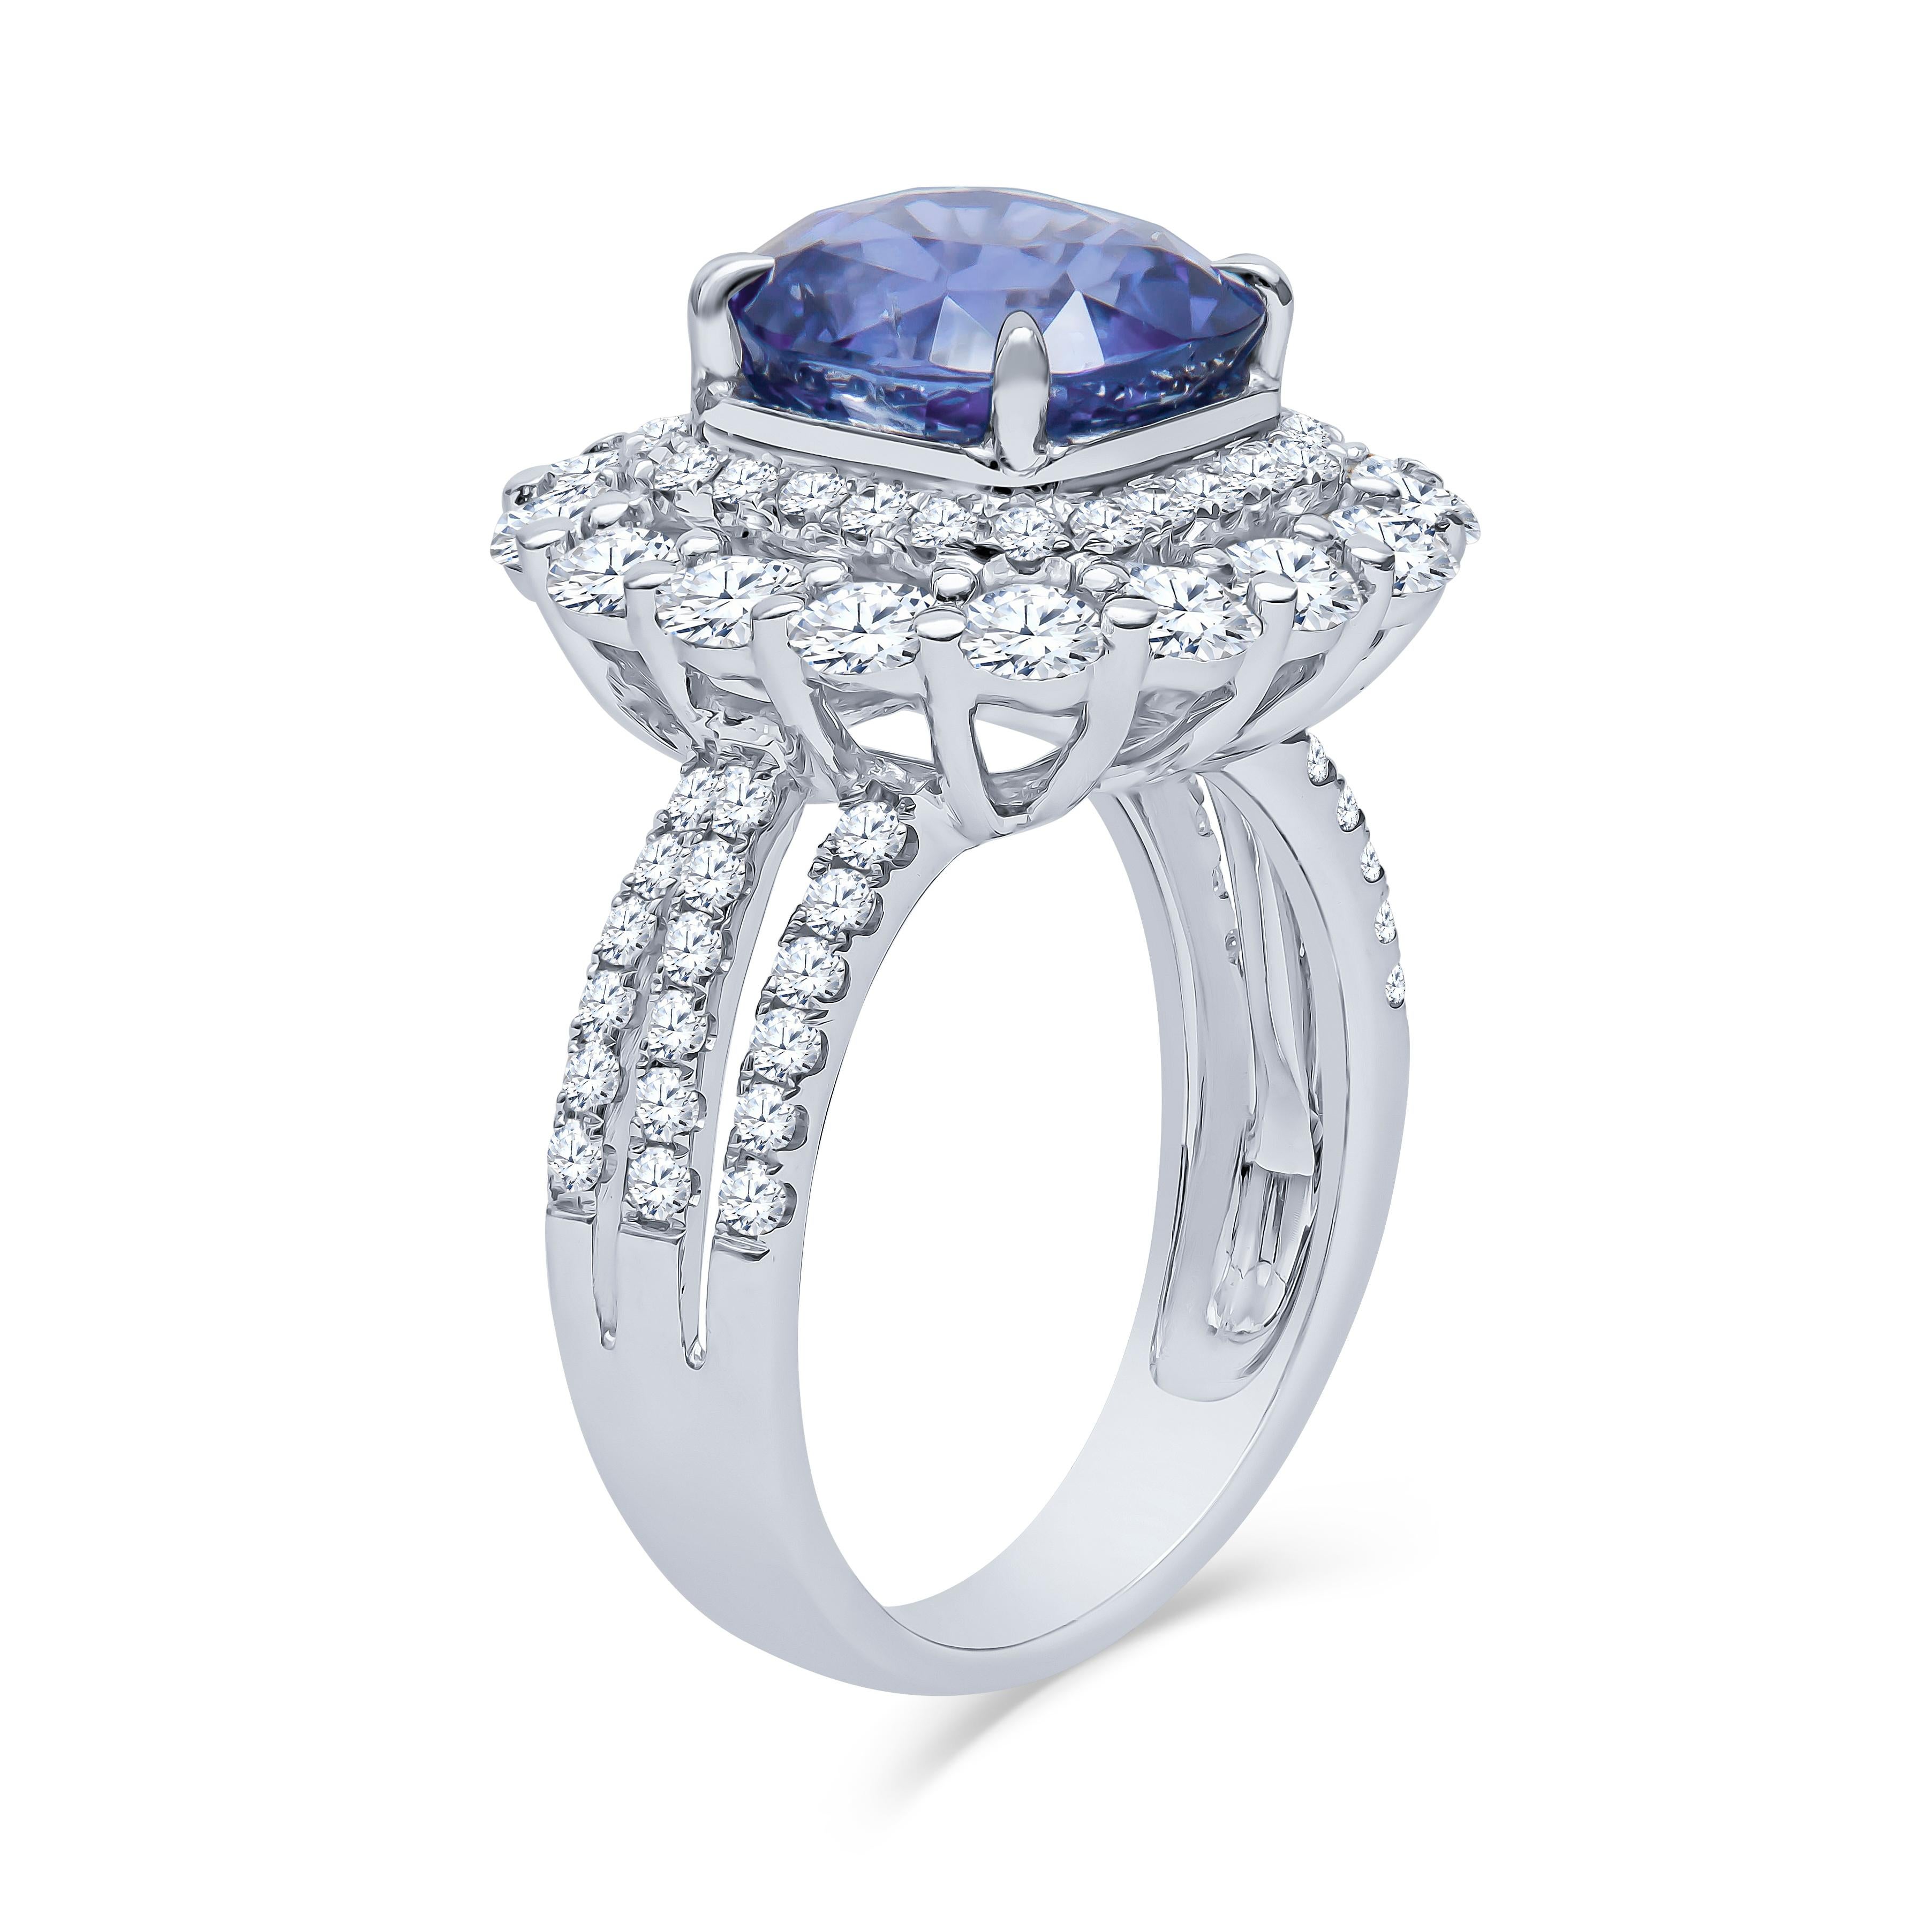 4.57 Carat total cushion cut Ceylon natural, heat only, blue sapphire (AGL report) with 1.93 carats total weight in round brilliant natural diamonds set in a double halo setting 18K white gold ring. This is a highly sought after 'cornflower' blue